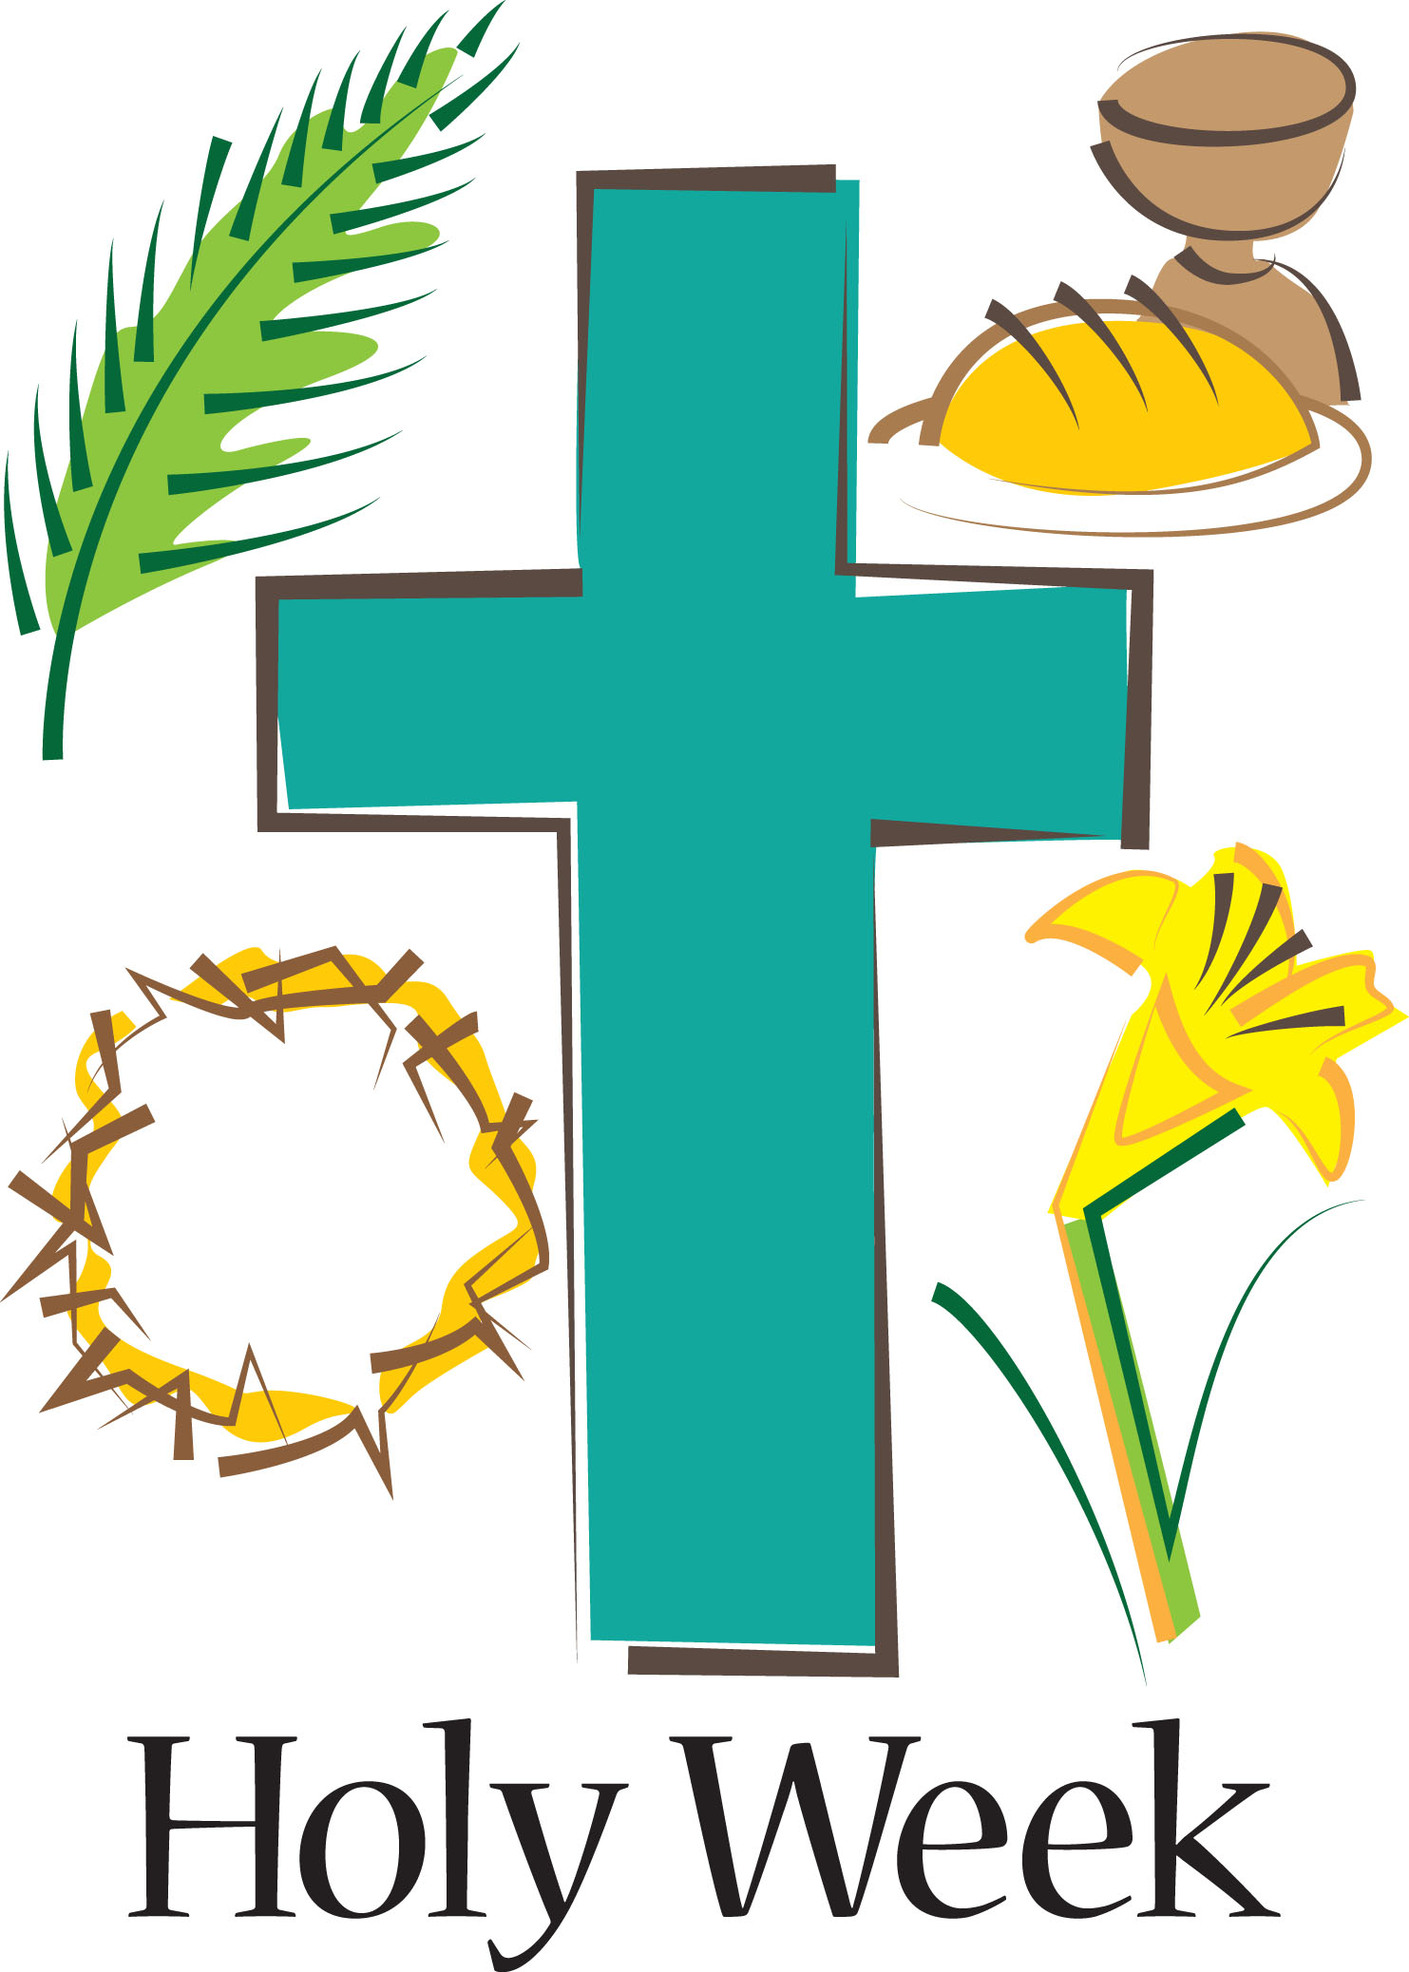 Holy Week Clip Art Clipart - Free to use Clip Art Resource